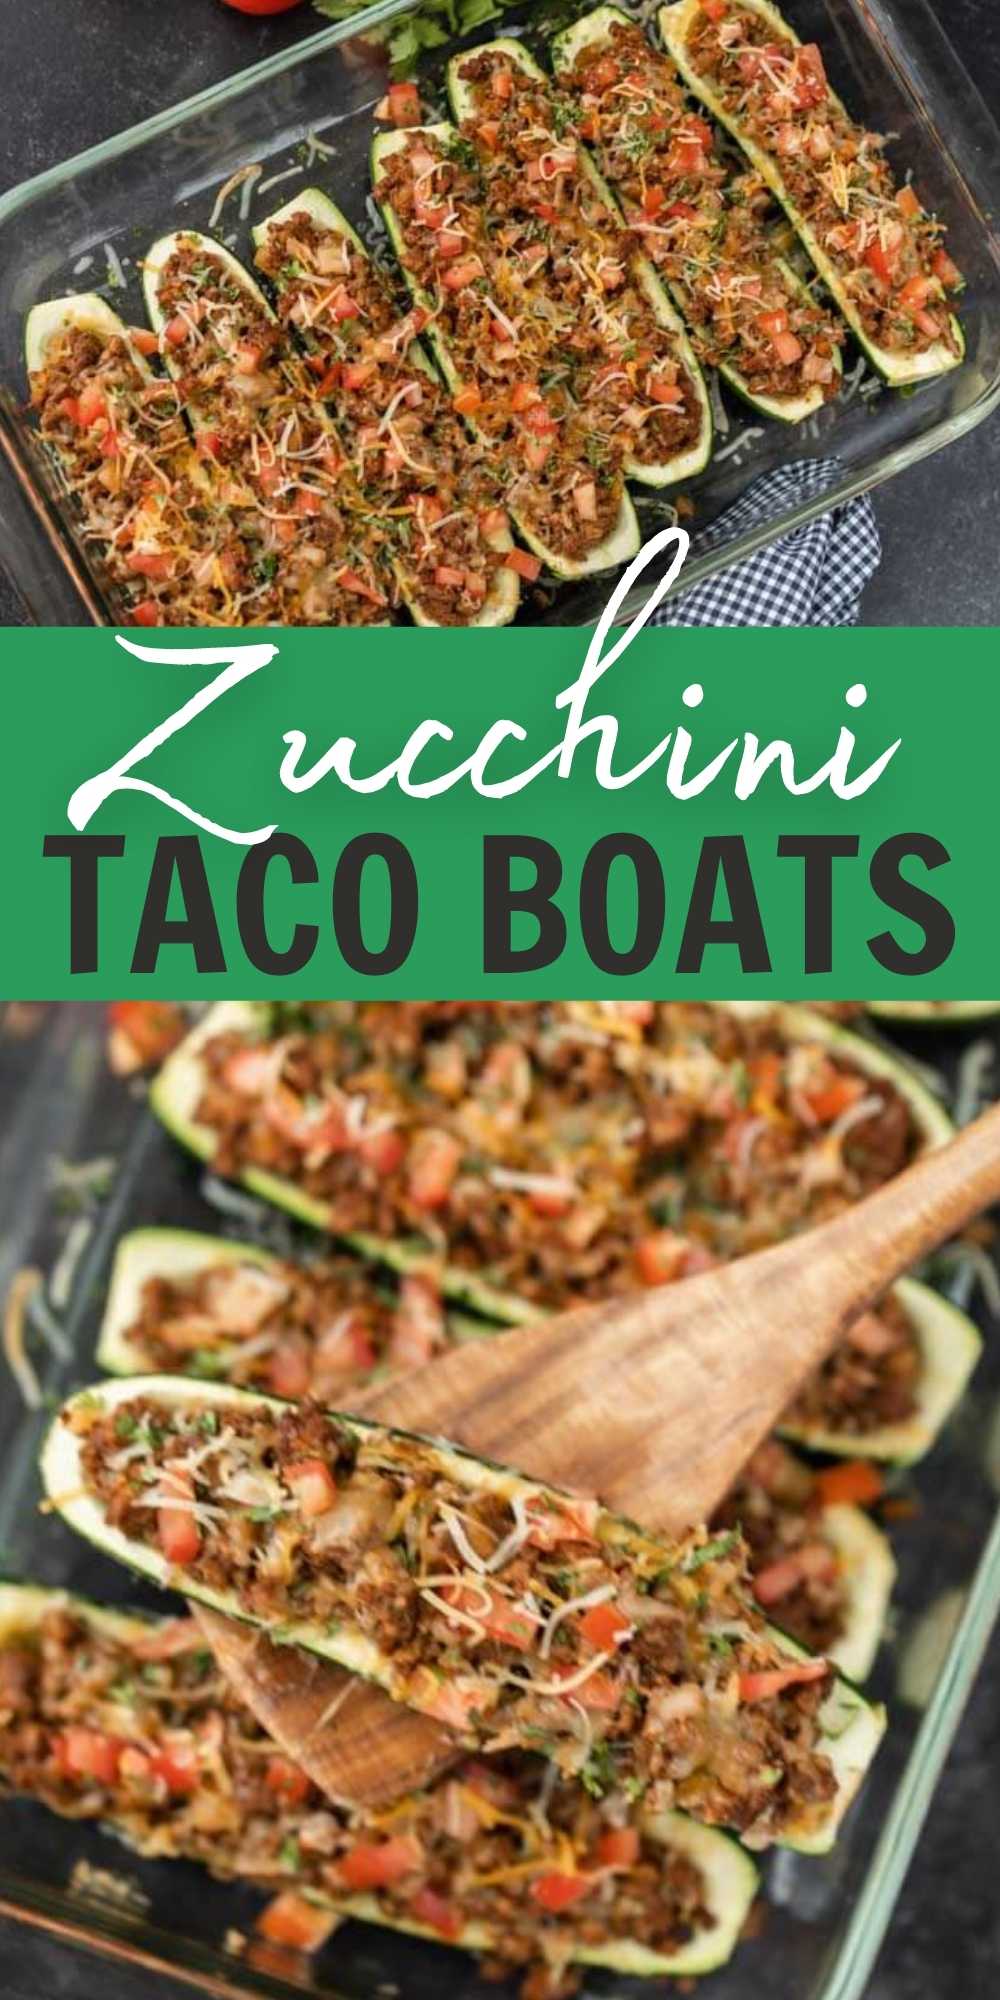 Zucchini Taco Boats are a great healthy option for Taco Tuesday! Make these delicious low carb zucchini taco boats that are packed with flavor too!  #eatingonadime #lowcarbrecipes #healthyrecipes #mexican #mexicanrecipes 
